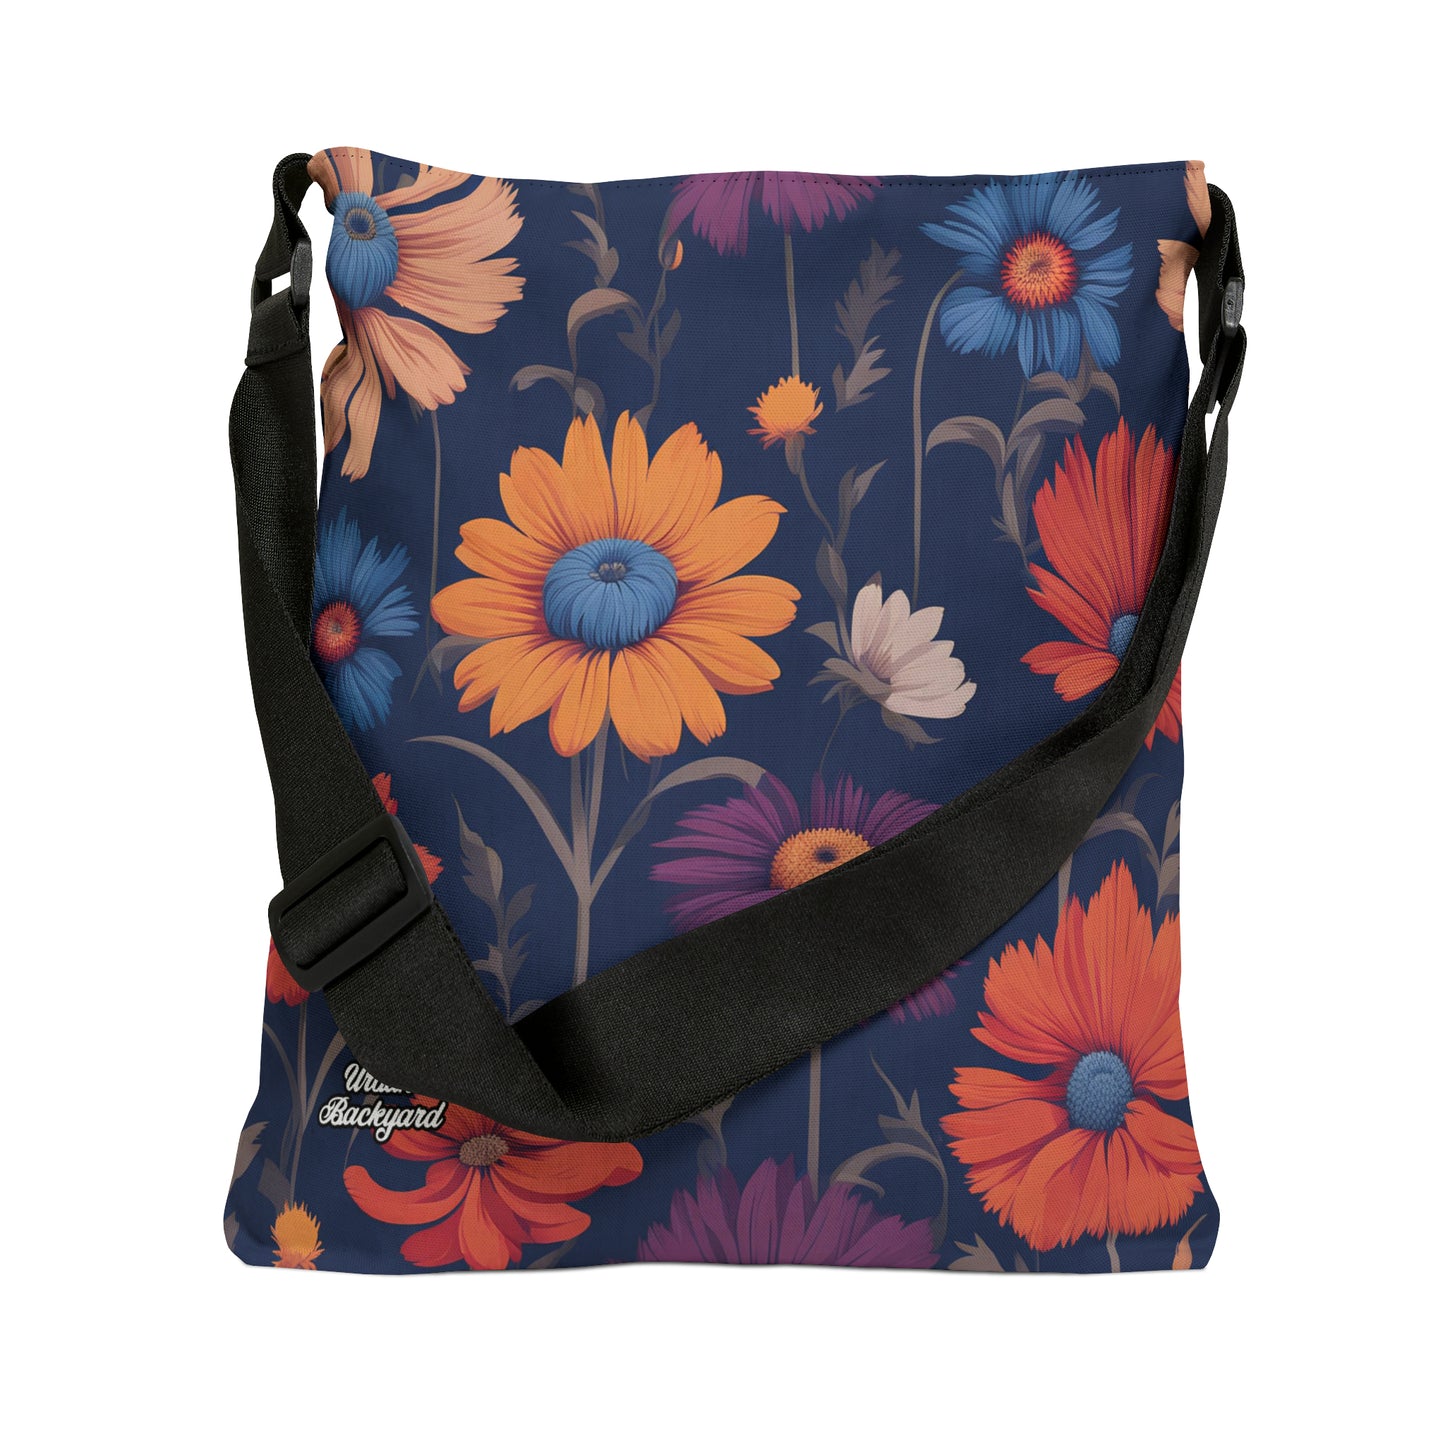 Fun Wildflowers, Tote Bag with Adjustable Strap - Trendy and Versatile